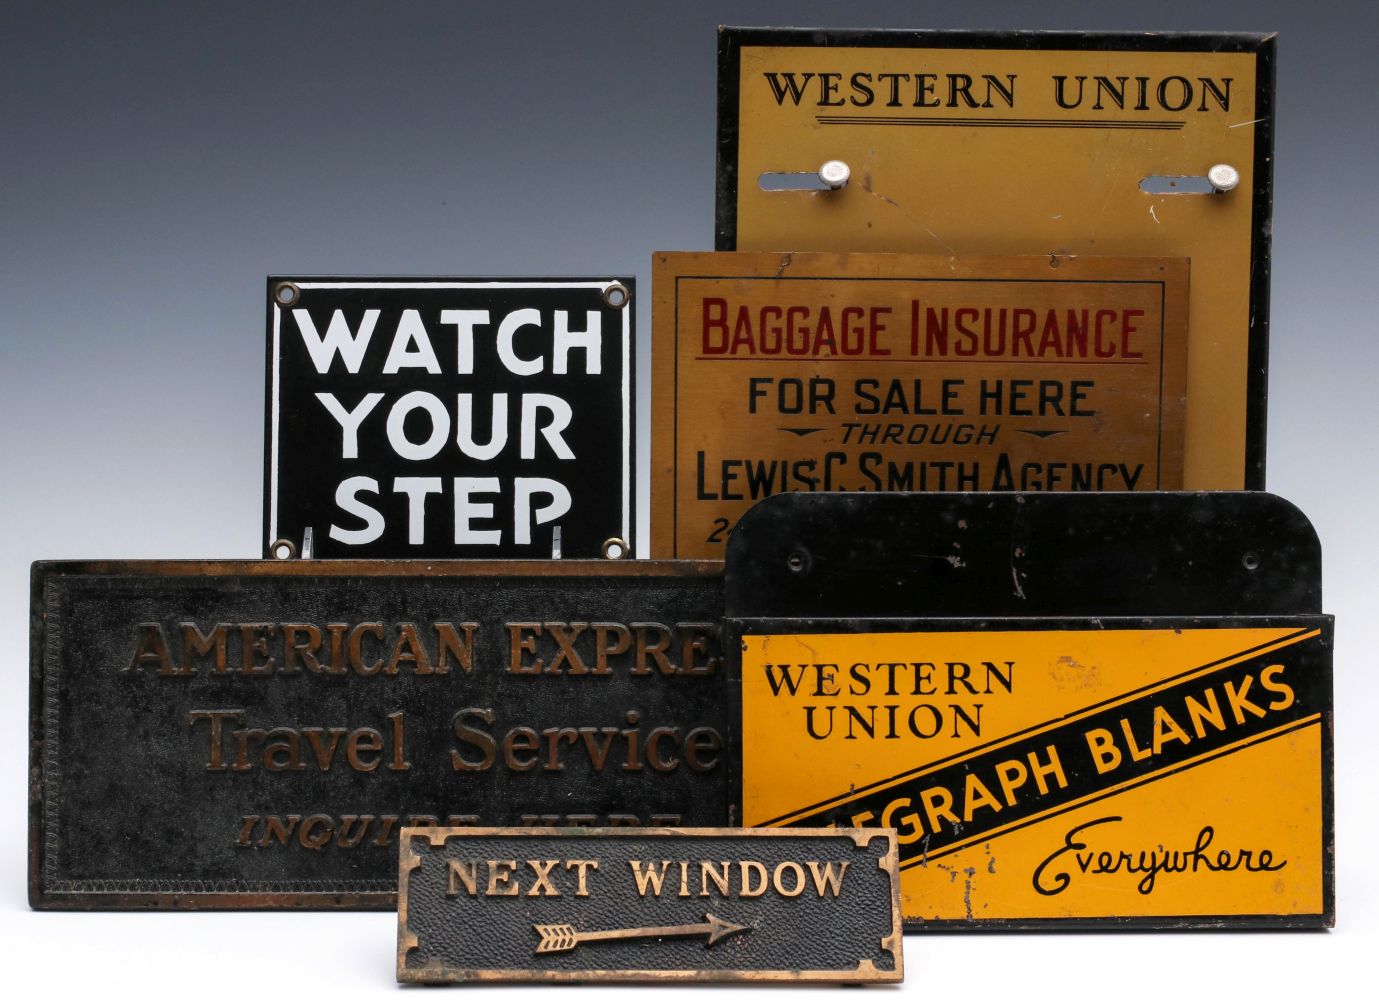 A COLLECTION OF SIGNS ONCE FOUND AT A UNION STATION